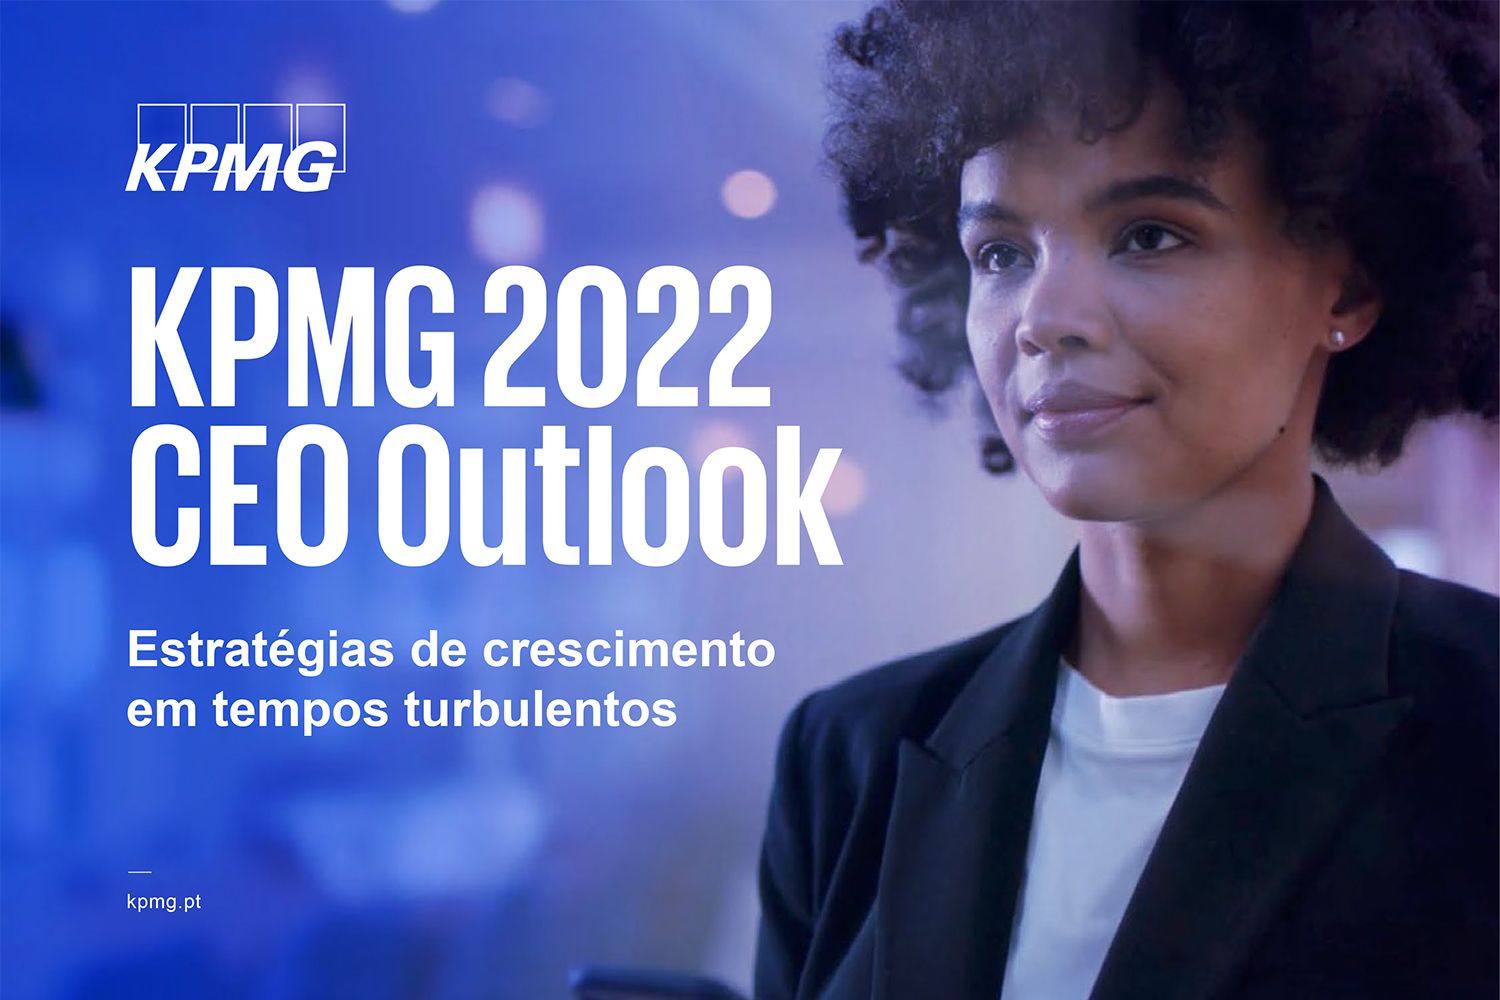 KPMG 2022 CEO Outlook